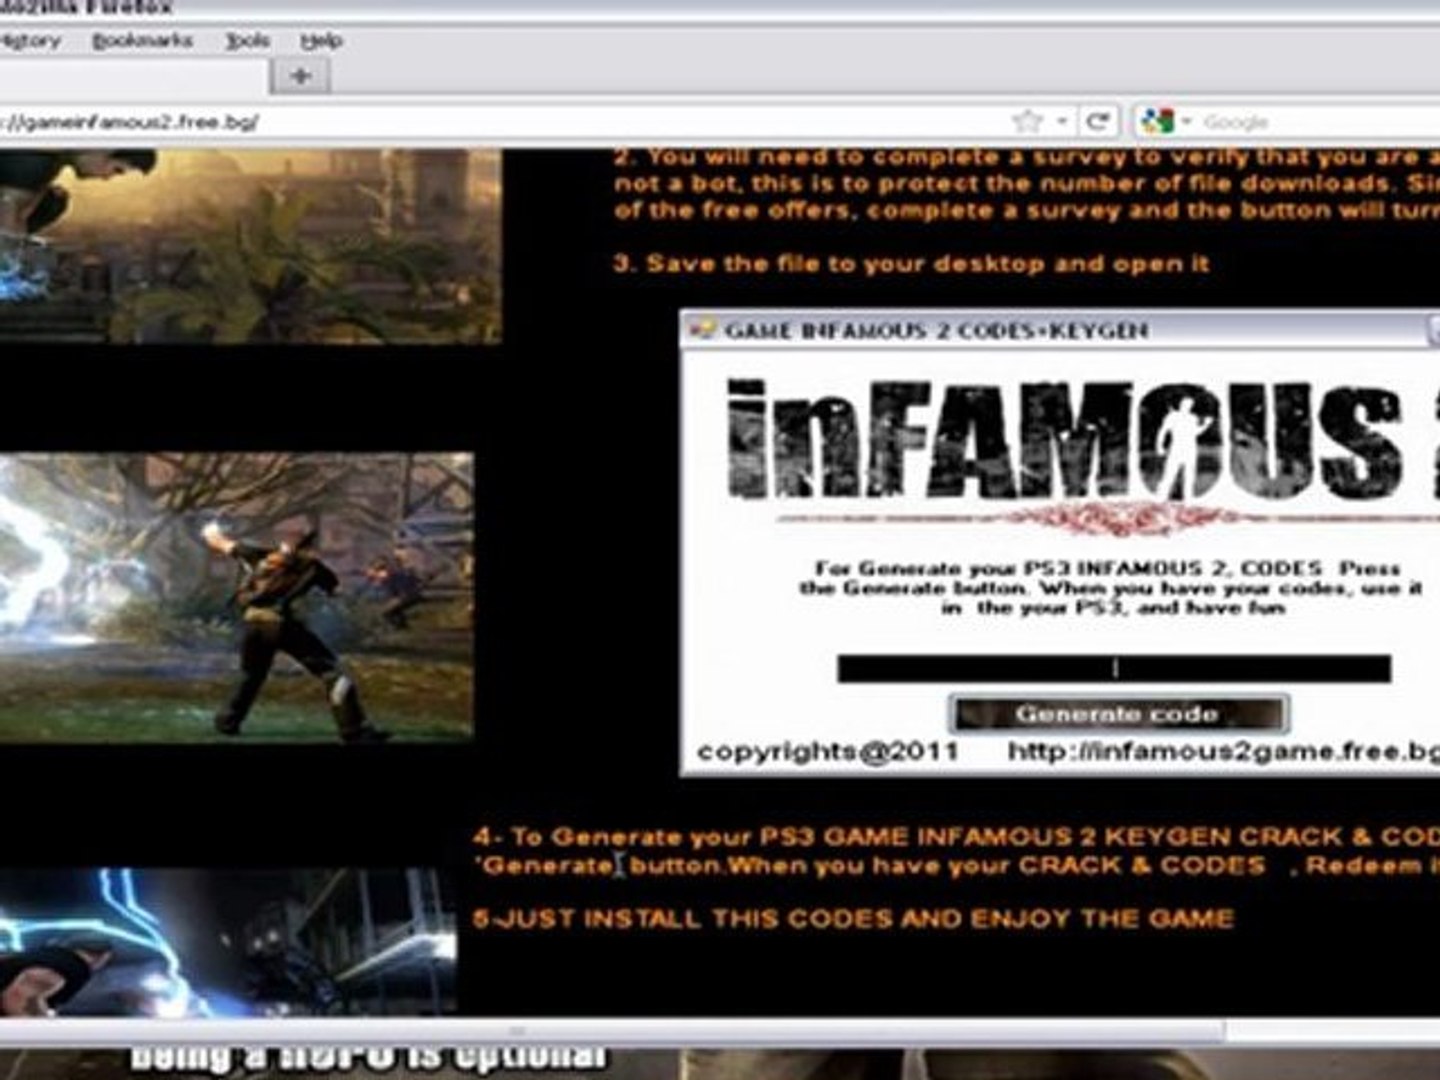 Second pc code son for infamous registration License Key